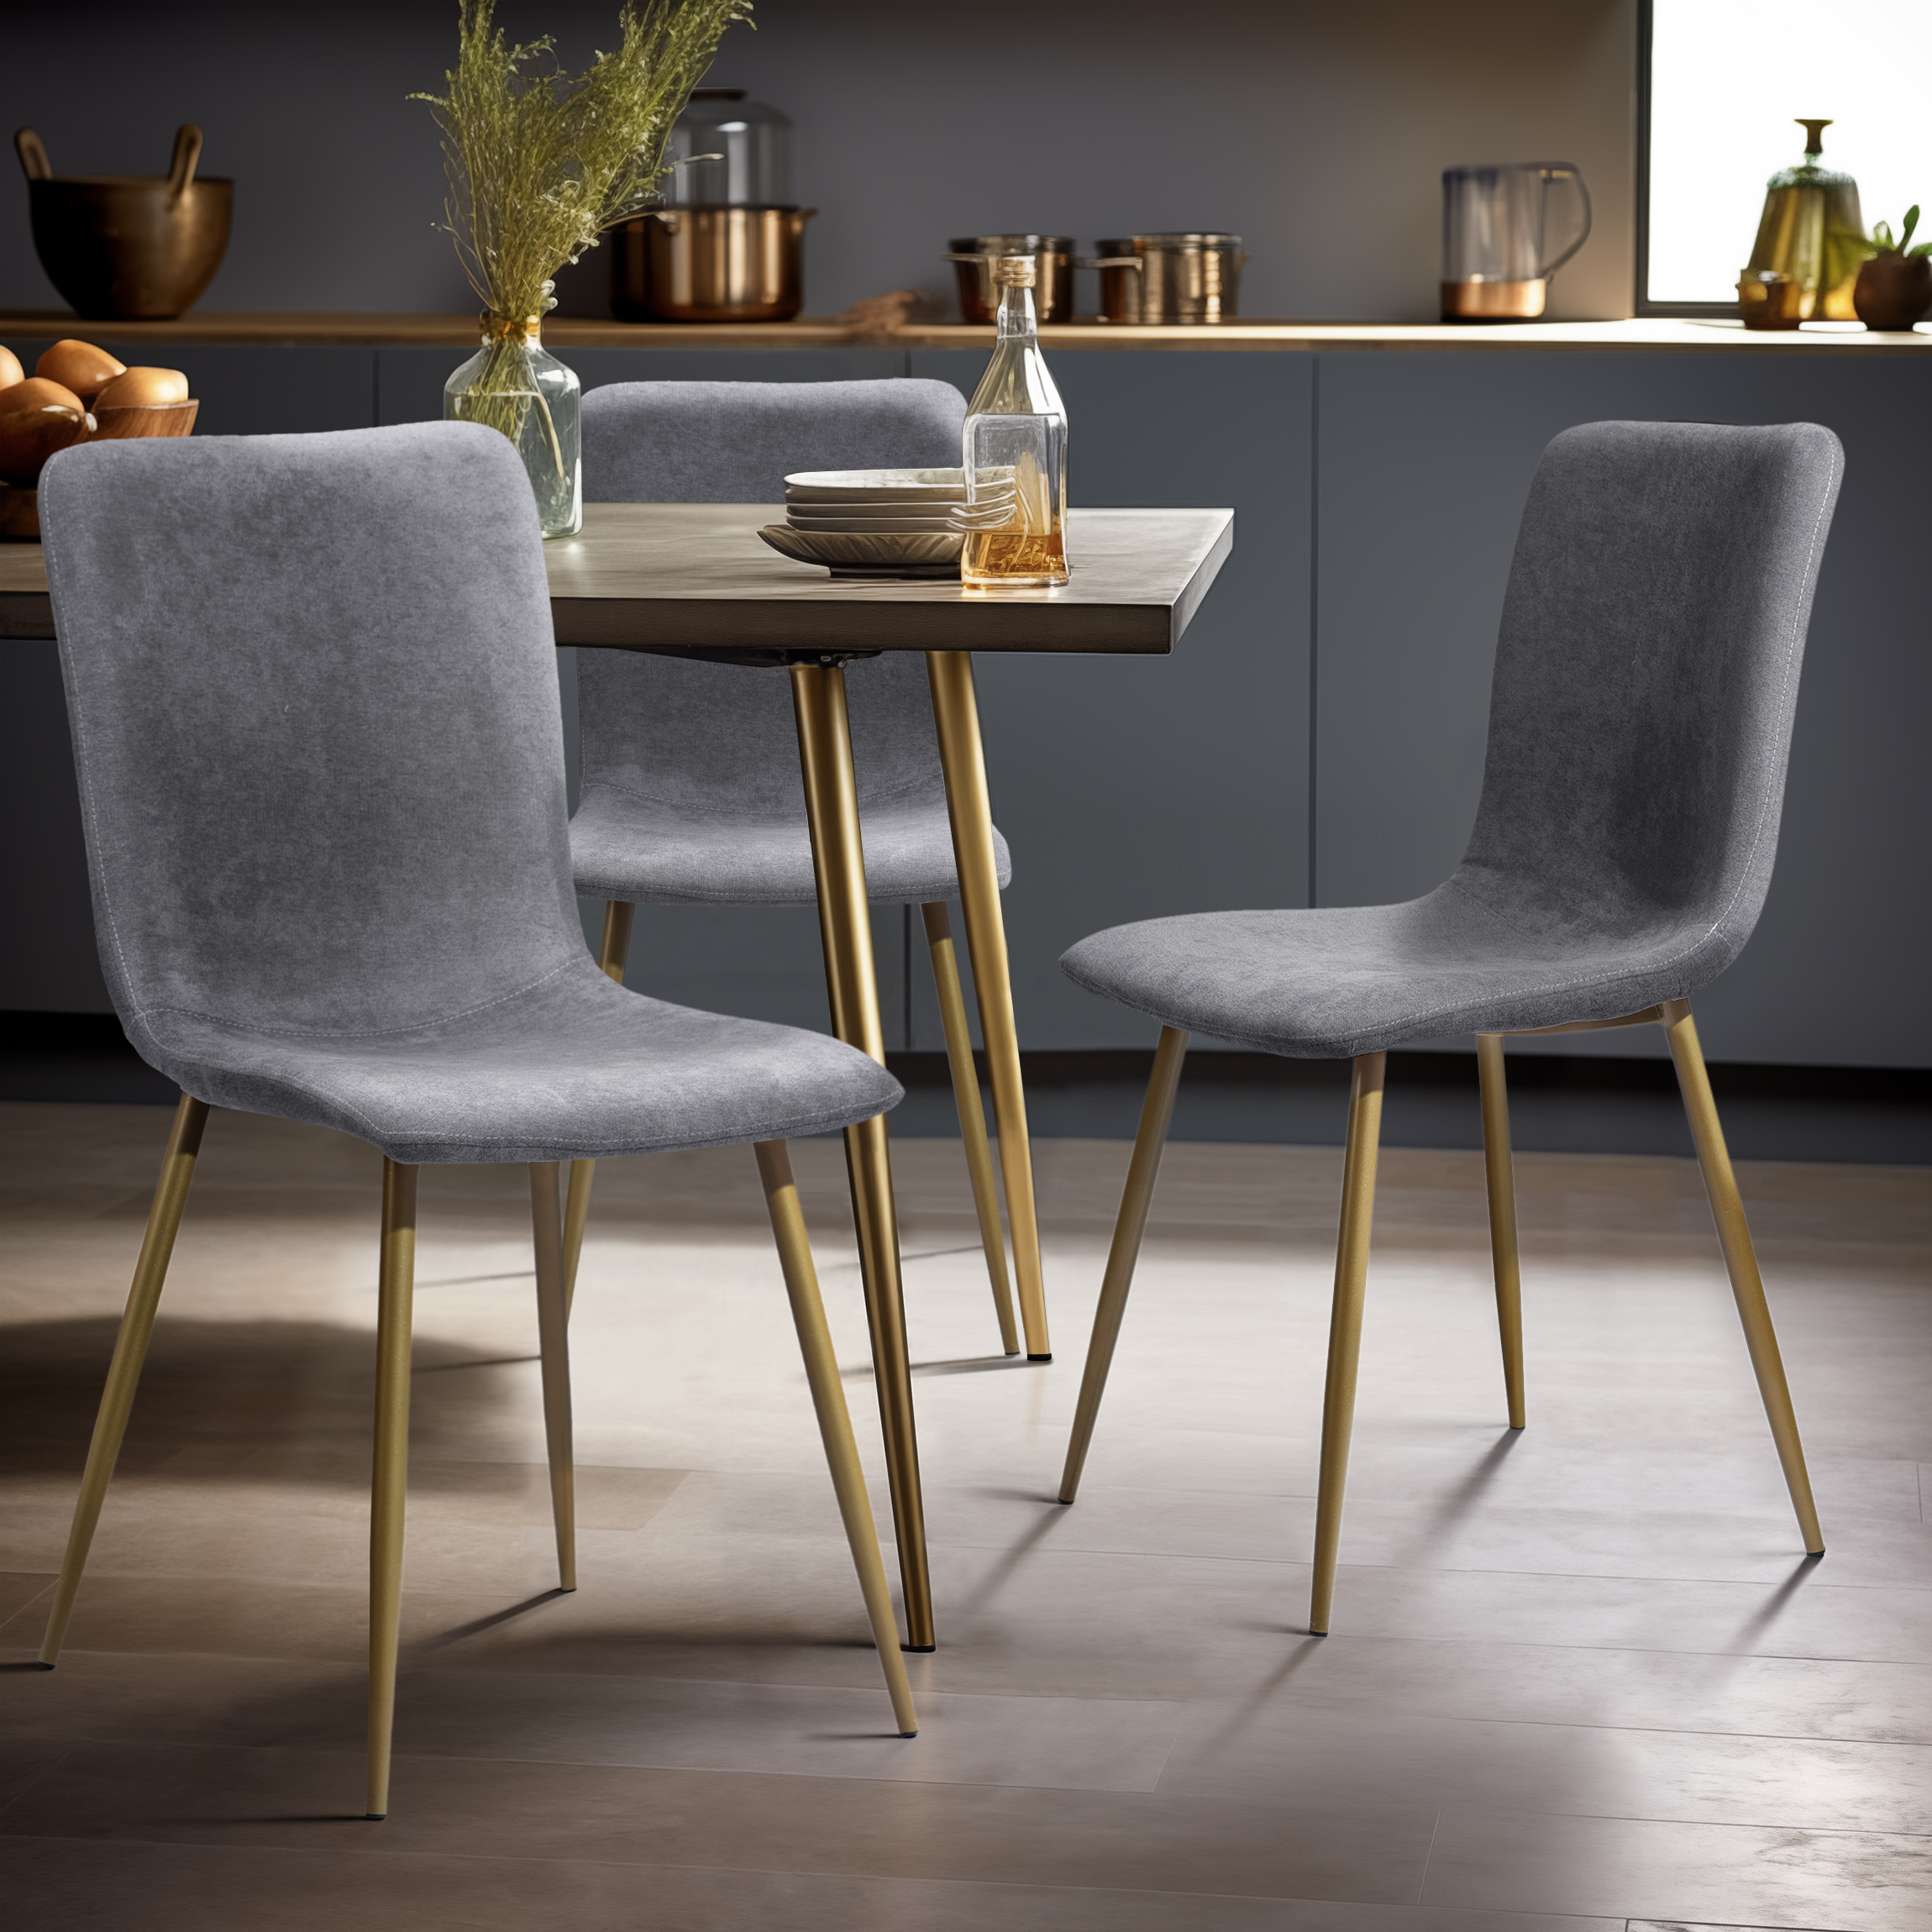 Homy Casa Modern Velvet Dining Chairs Set of 4 - Comfortable Faux Upholstery with Metal Legs, Dark Gray - image 3 of 8